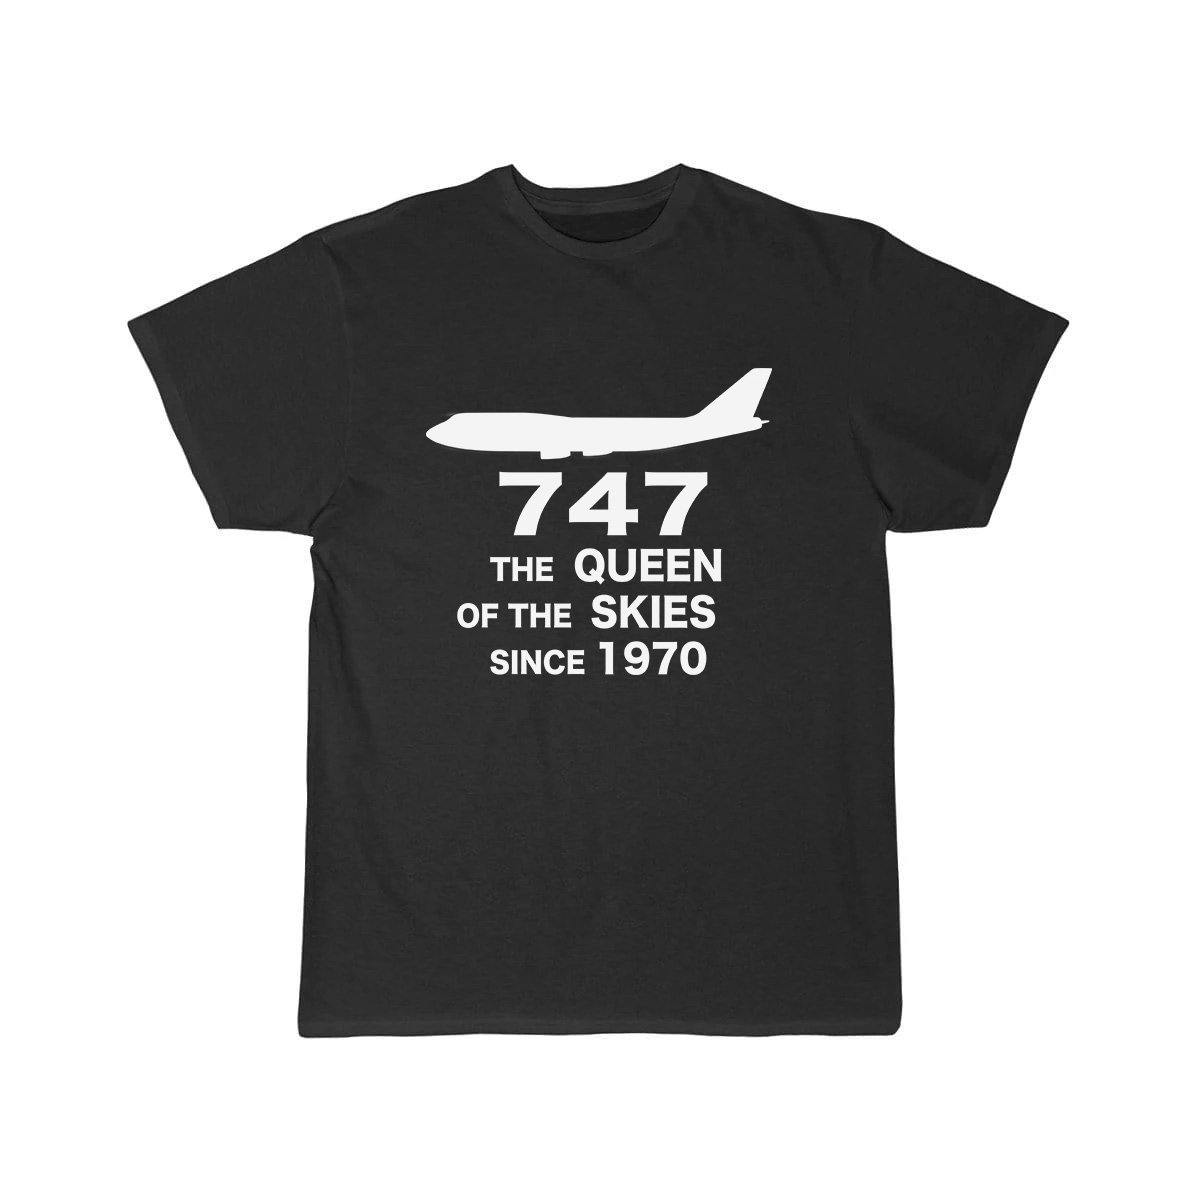 B747 THE QUEEN OF THE SKIES SINCE 1970 DESIGNED T-SHIRT THE AV8R